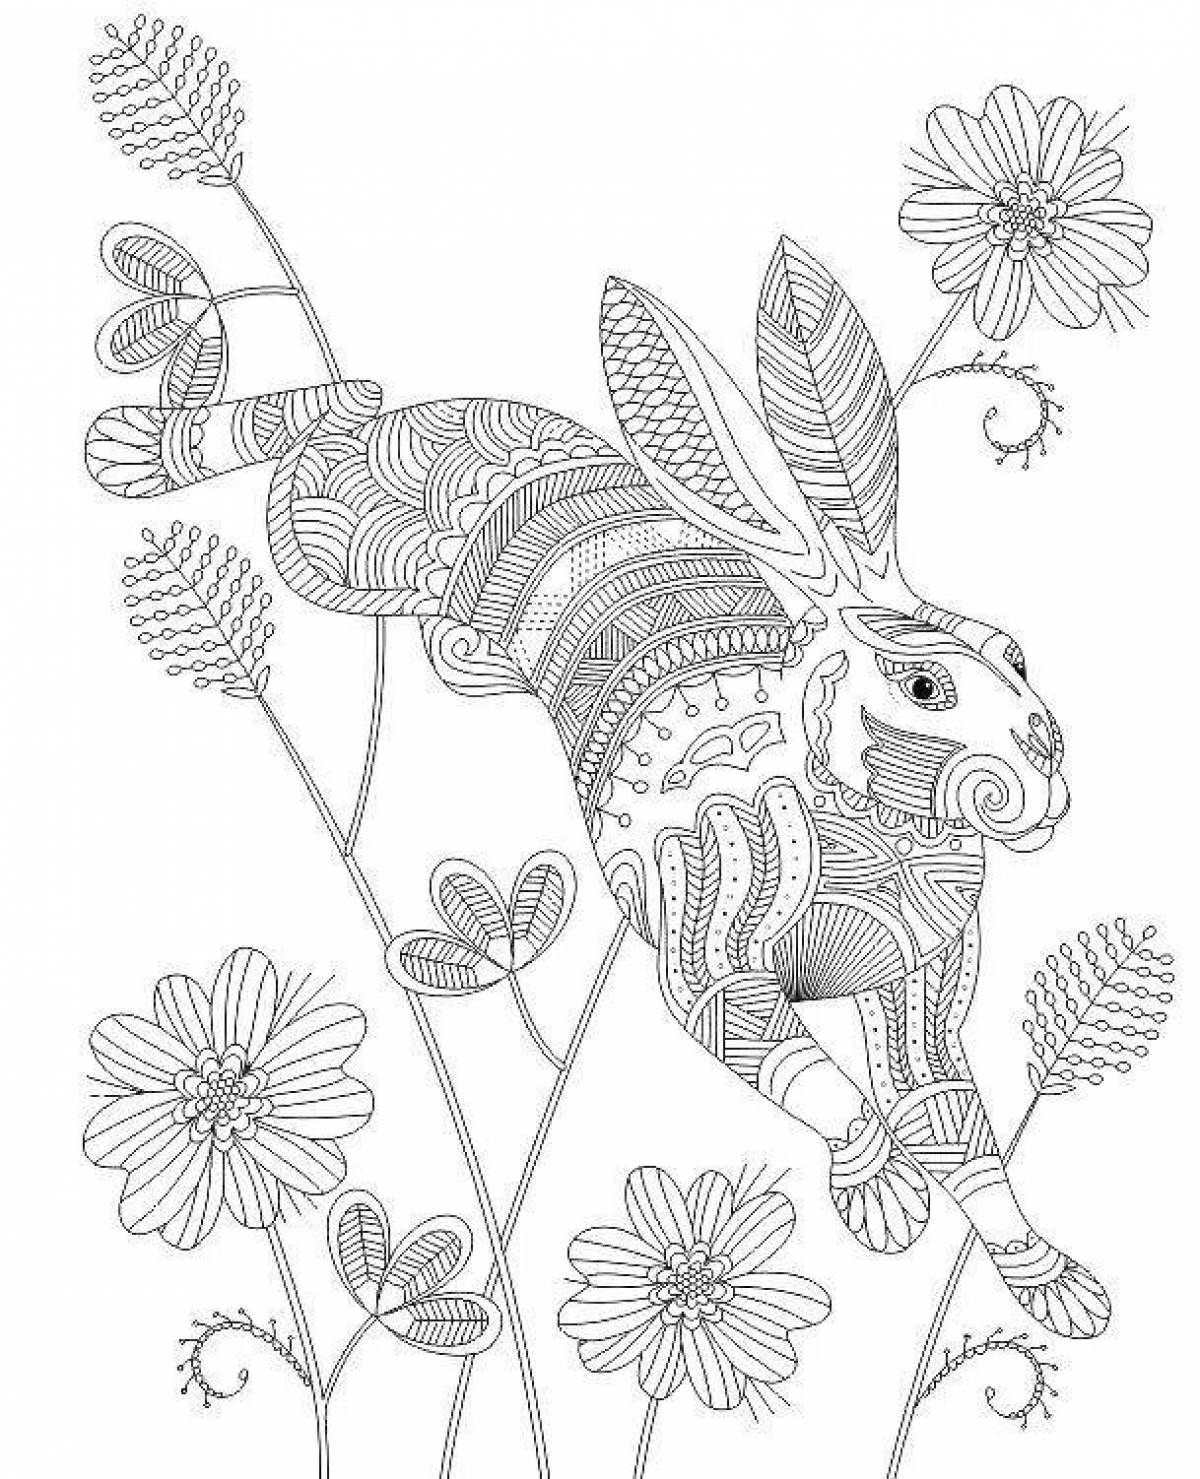 Coloring book playful anti-stress hare